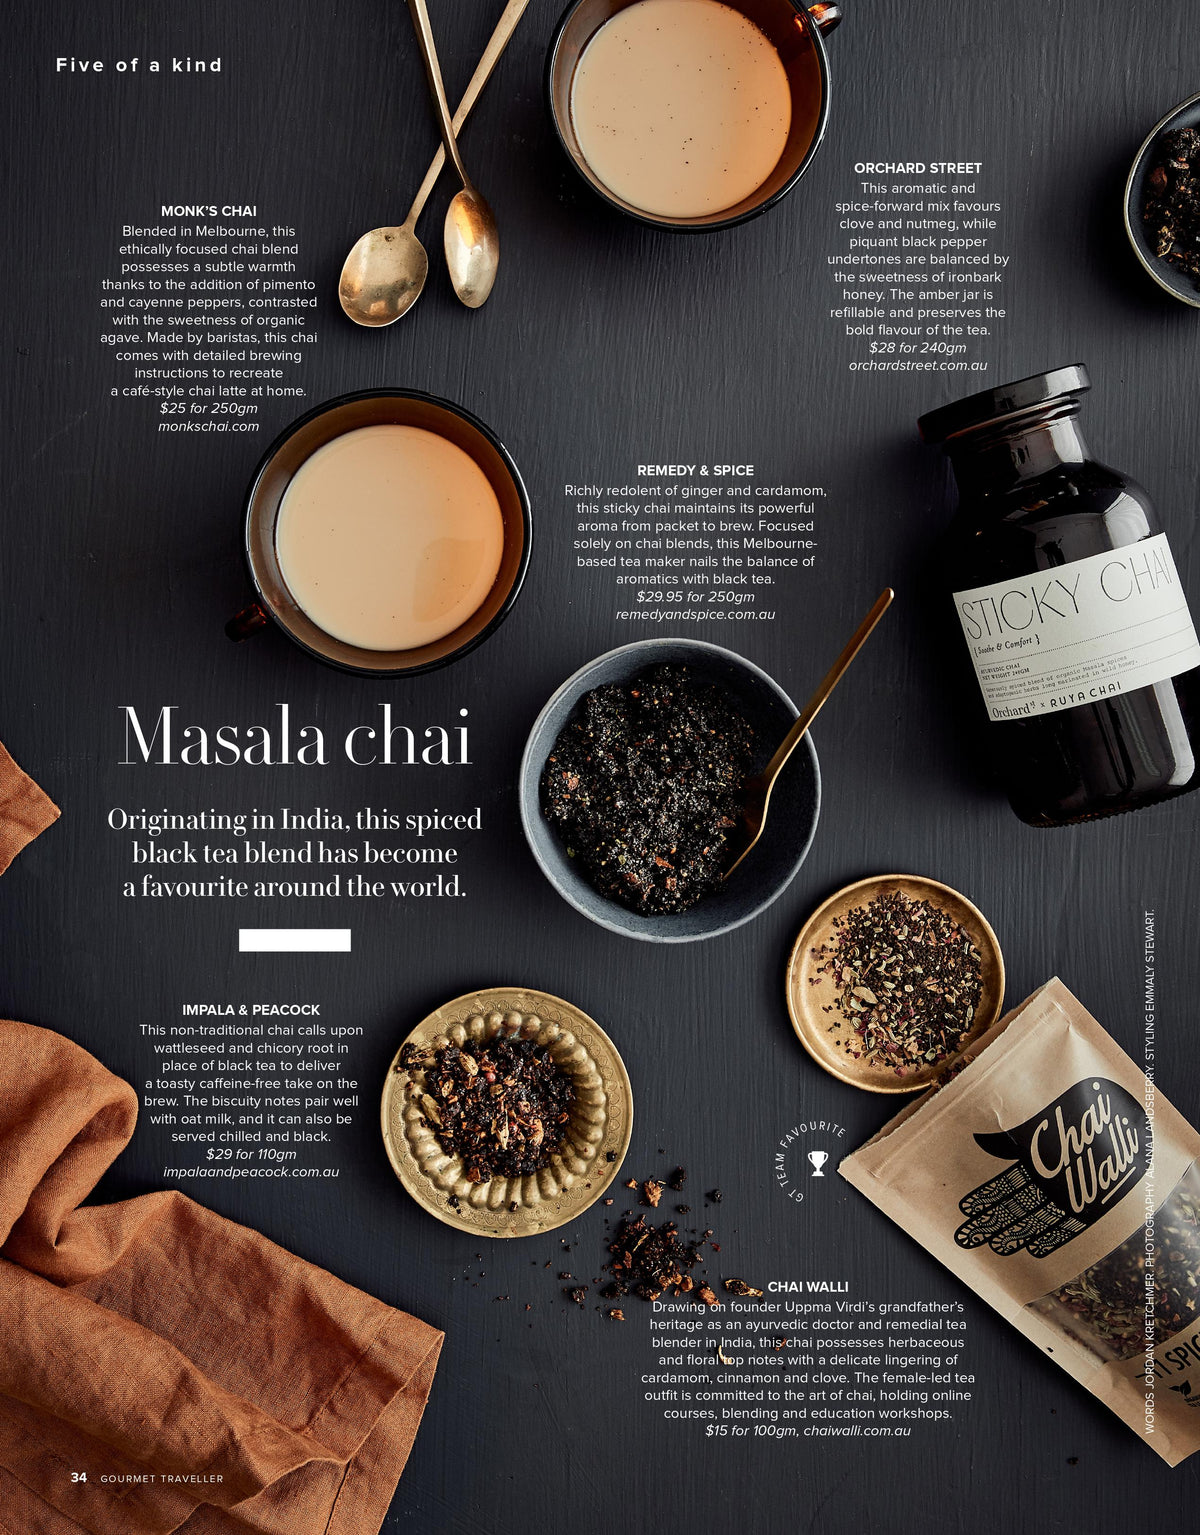 Chai Walli featured in Gourmet Traveller's 'Five of a Kind'!